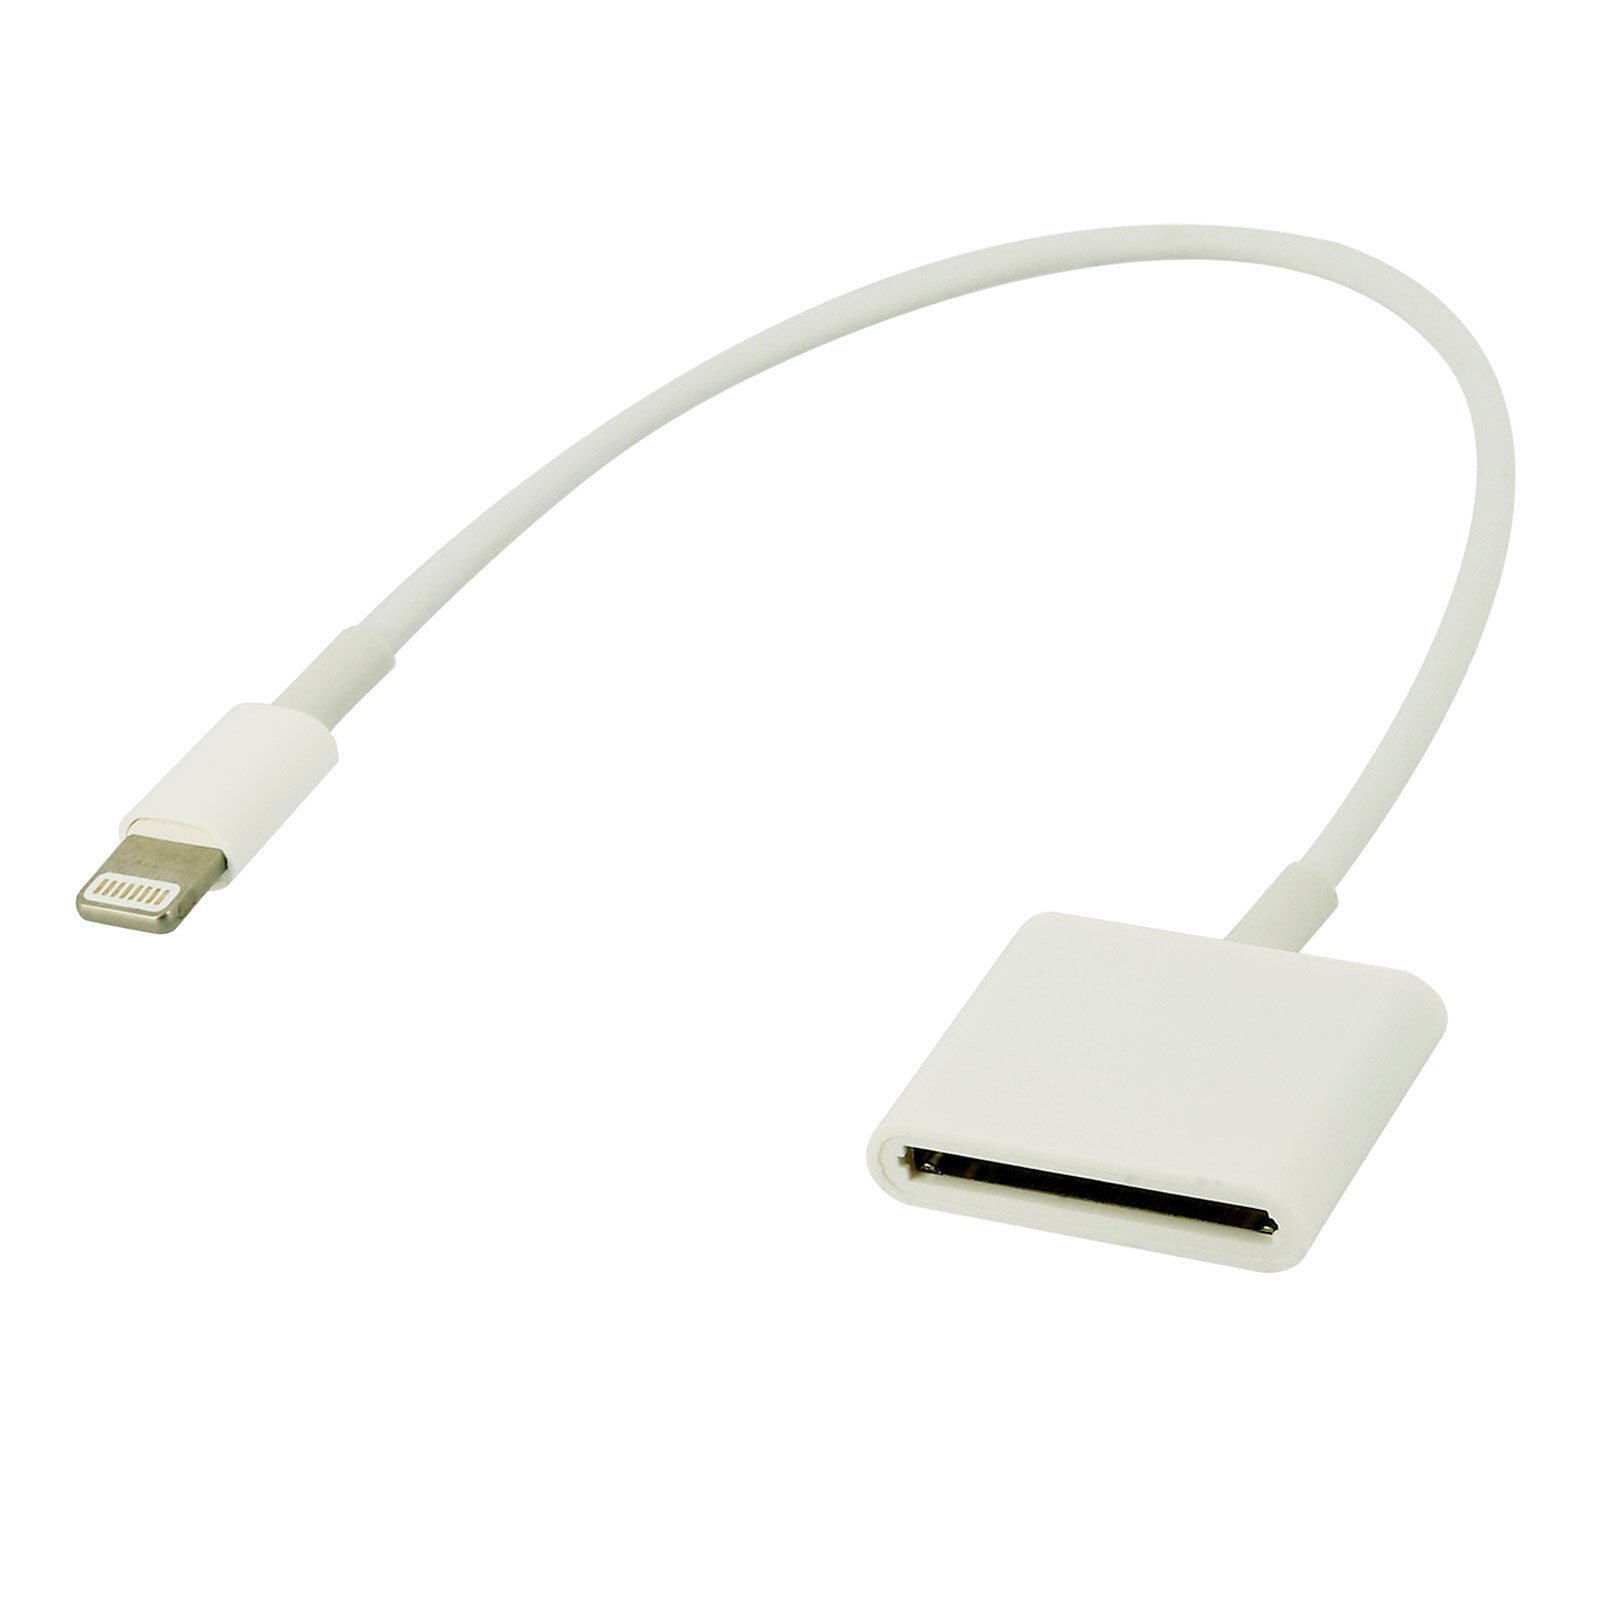 Adaptateur Lightning Vers 30 Broches pas cher - Achat neuf et